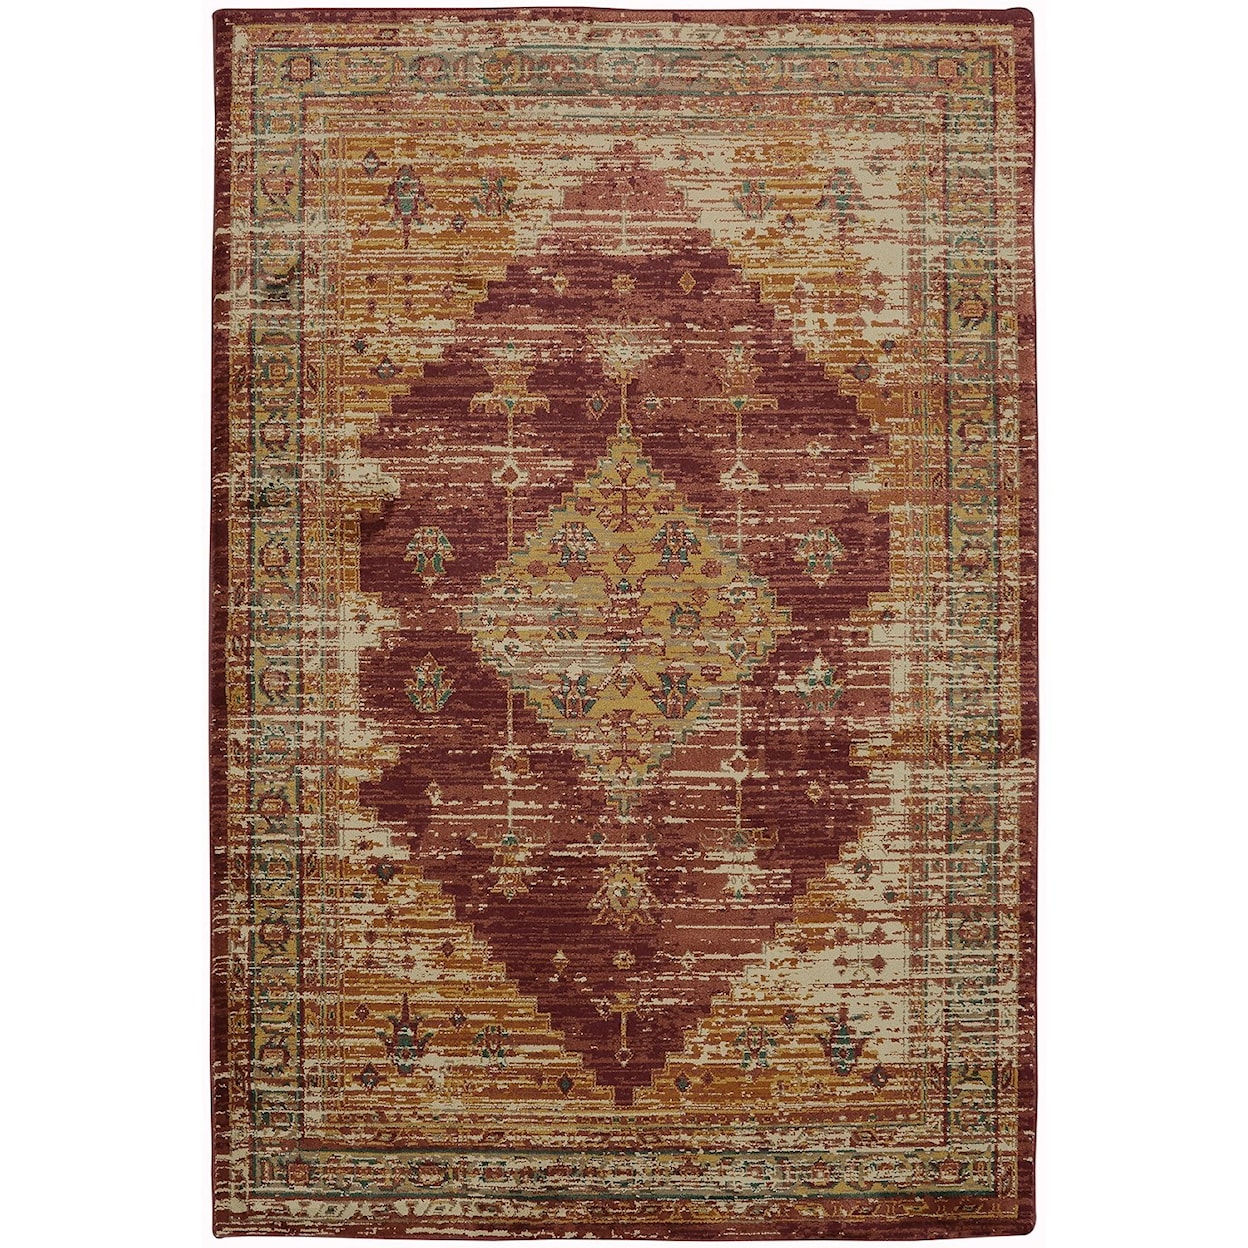 American Rug Craftsmen Providence 5' 3"x7' 10" Parlin Berry Area Rug